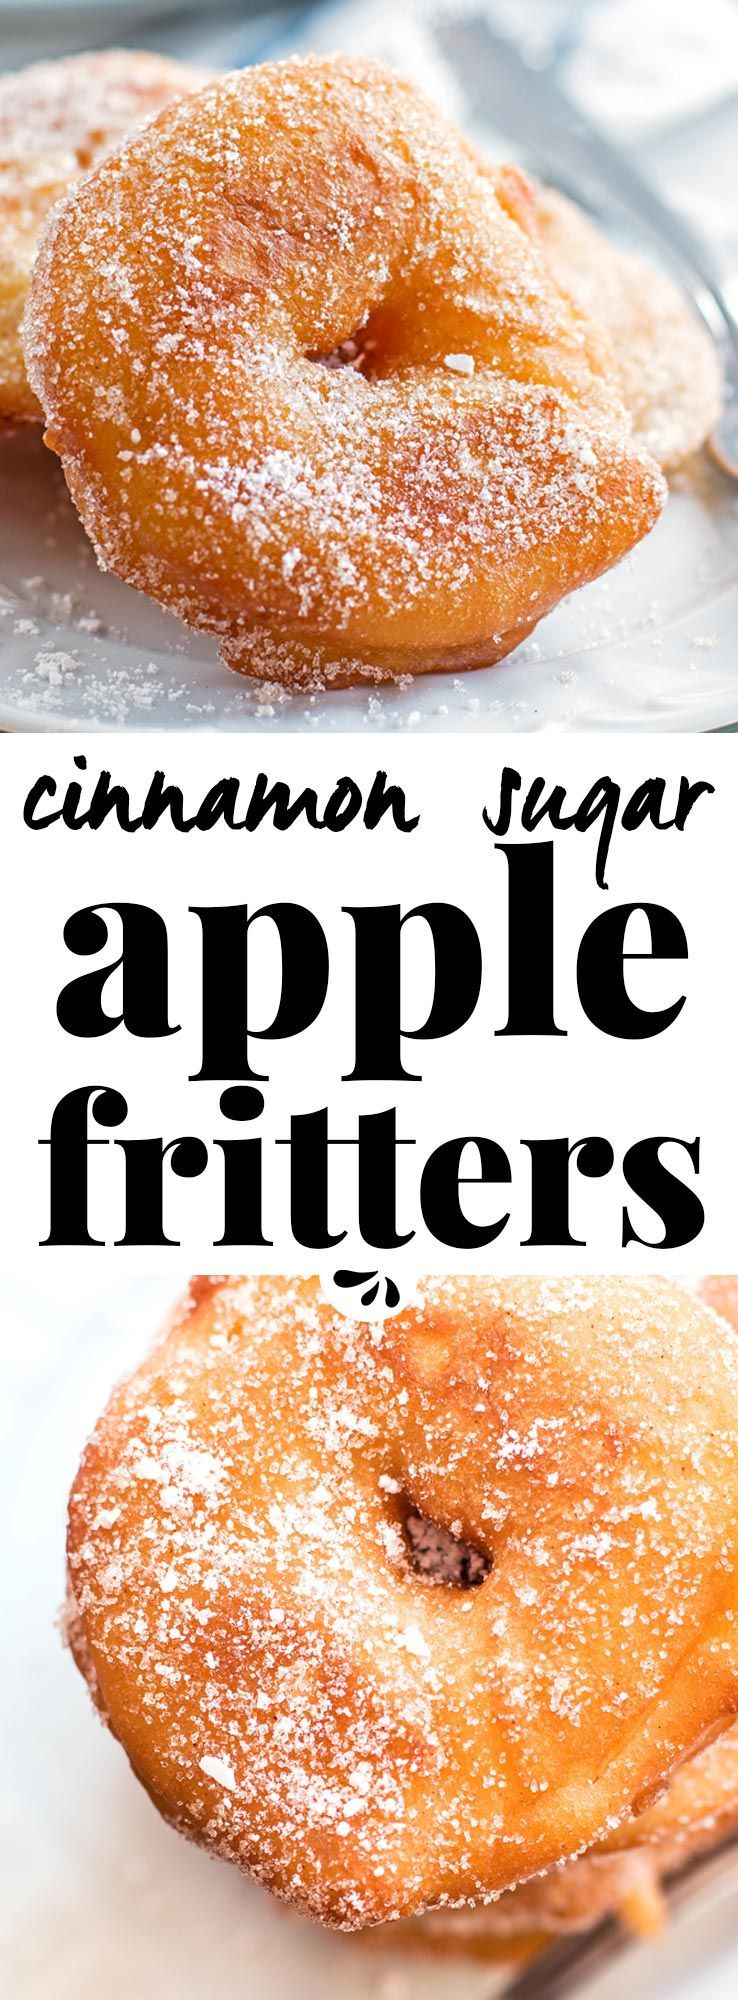 Are you looking for an easy apple fritter recipe? These are SO good! They look like fried apple donuts – the homemade batter turns